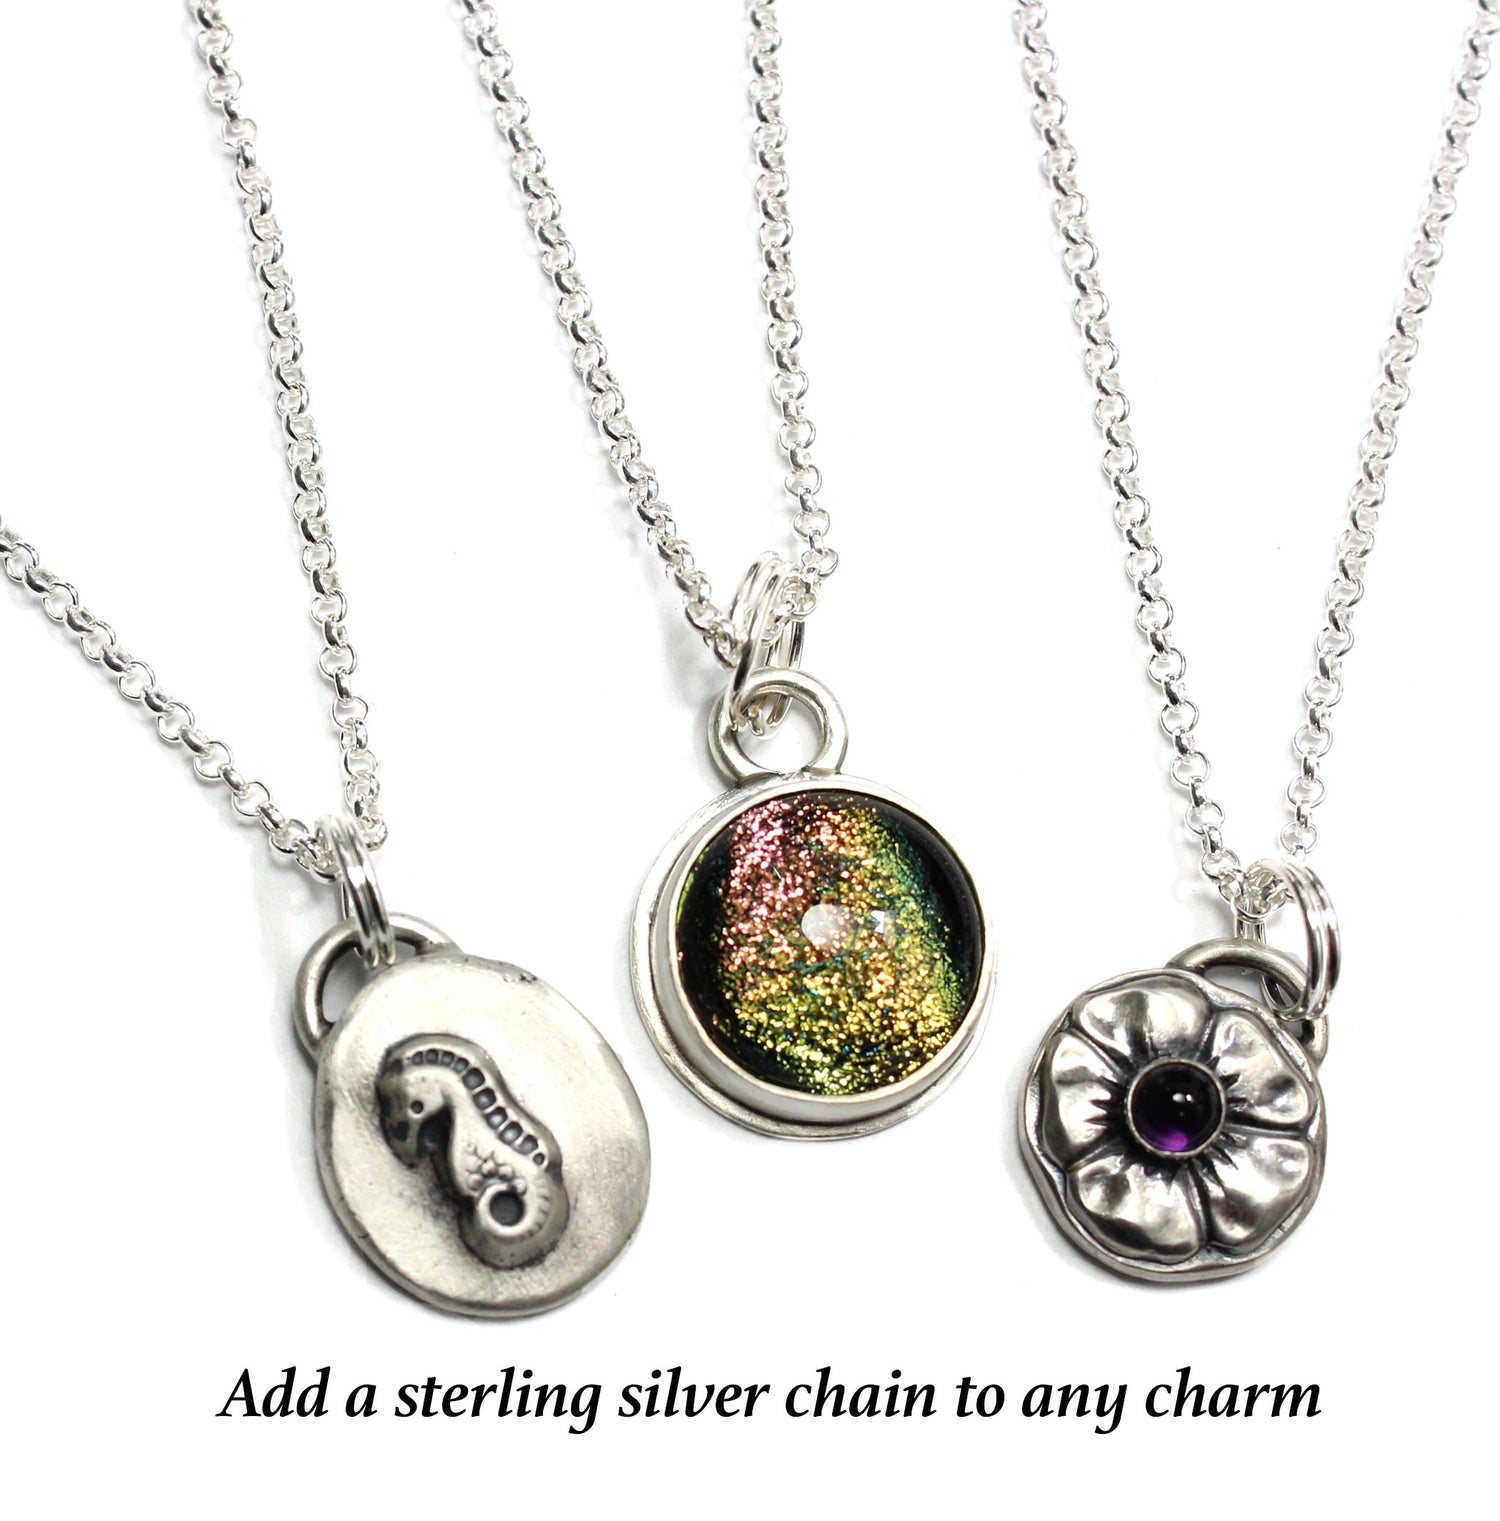 Picture showing that a sterling silver necklace can be added to the order.